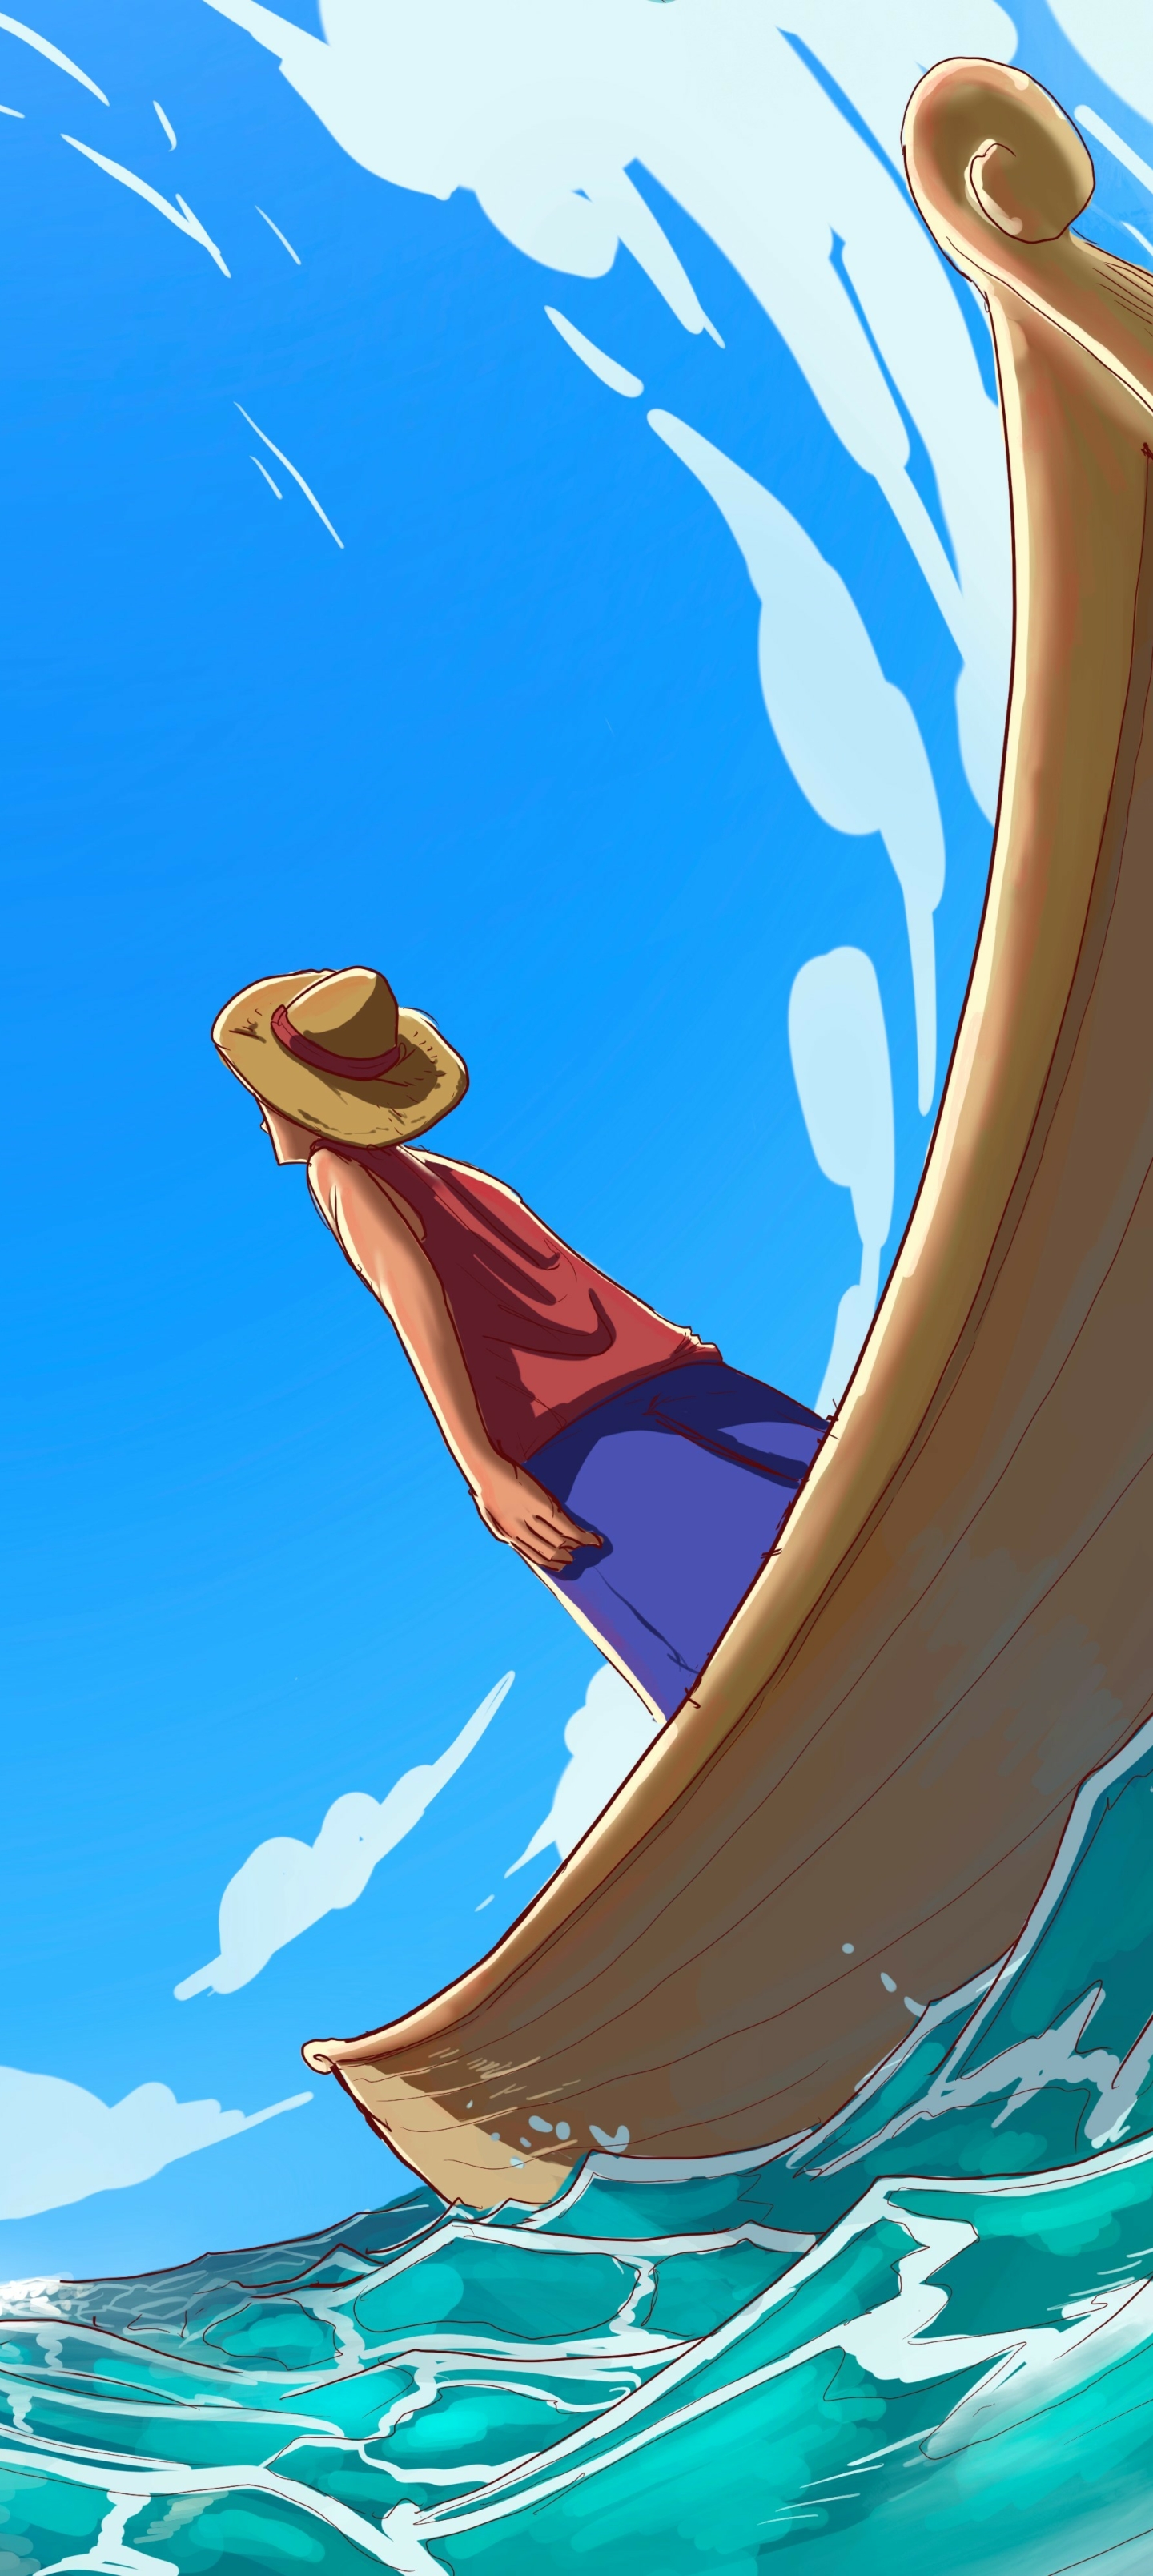 Anime One Piece Phone Wallpaper - Mobile Abyss